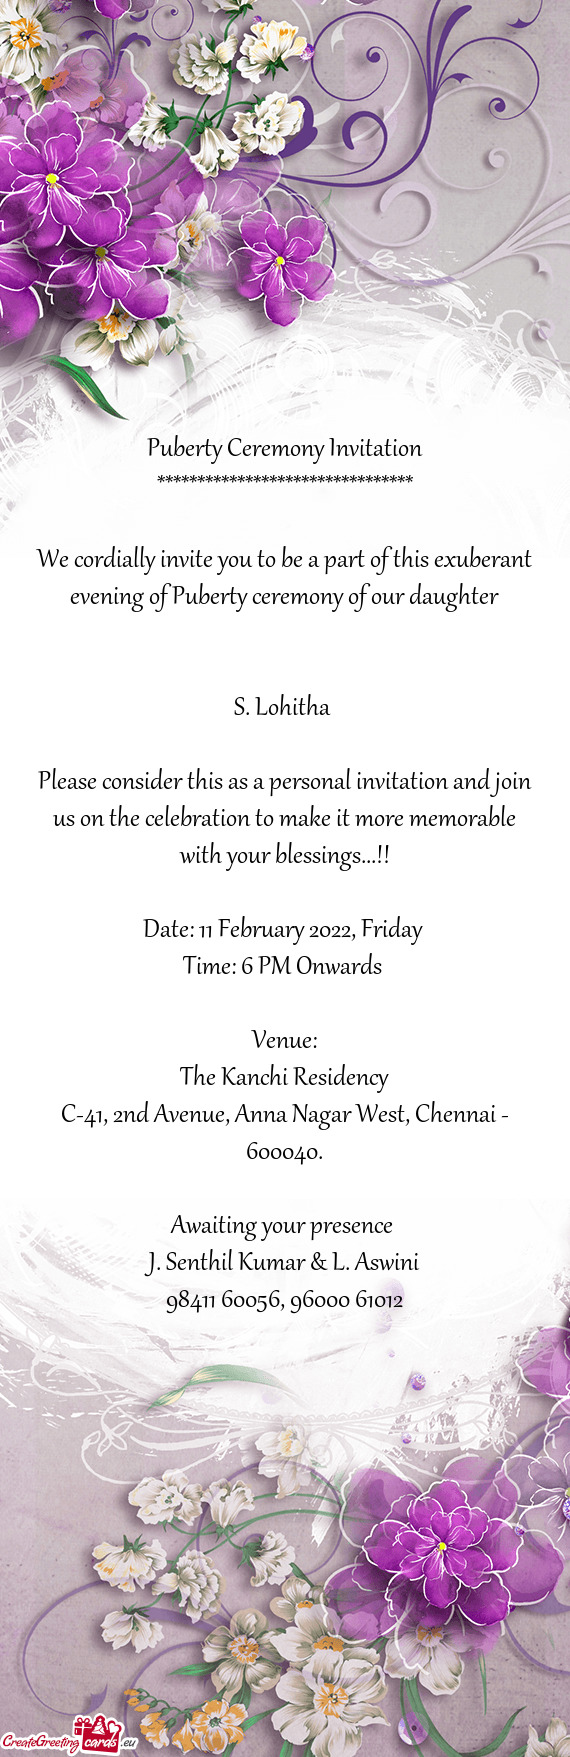 We cordially invite you to be a part of this exuberant evening of Puberty ceremony of our daughter